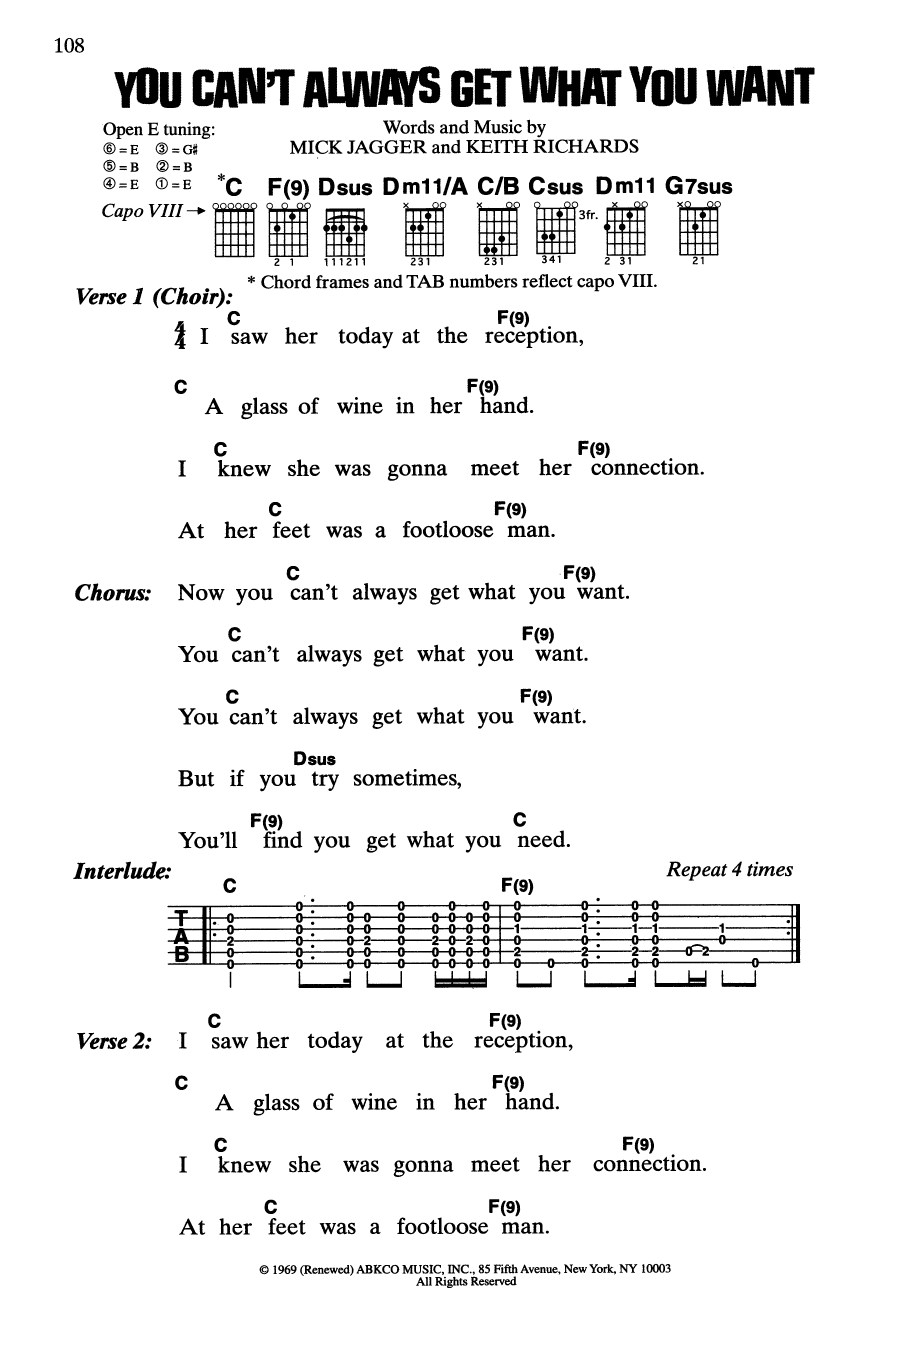 Download The Rolling Stones You Can't Always Get What You Want Sheet Music